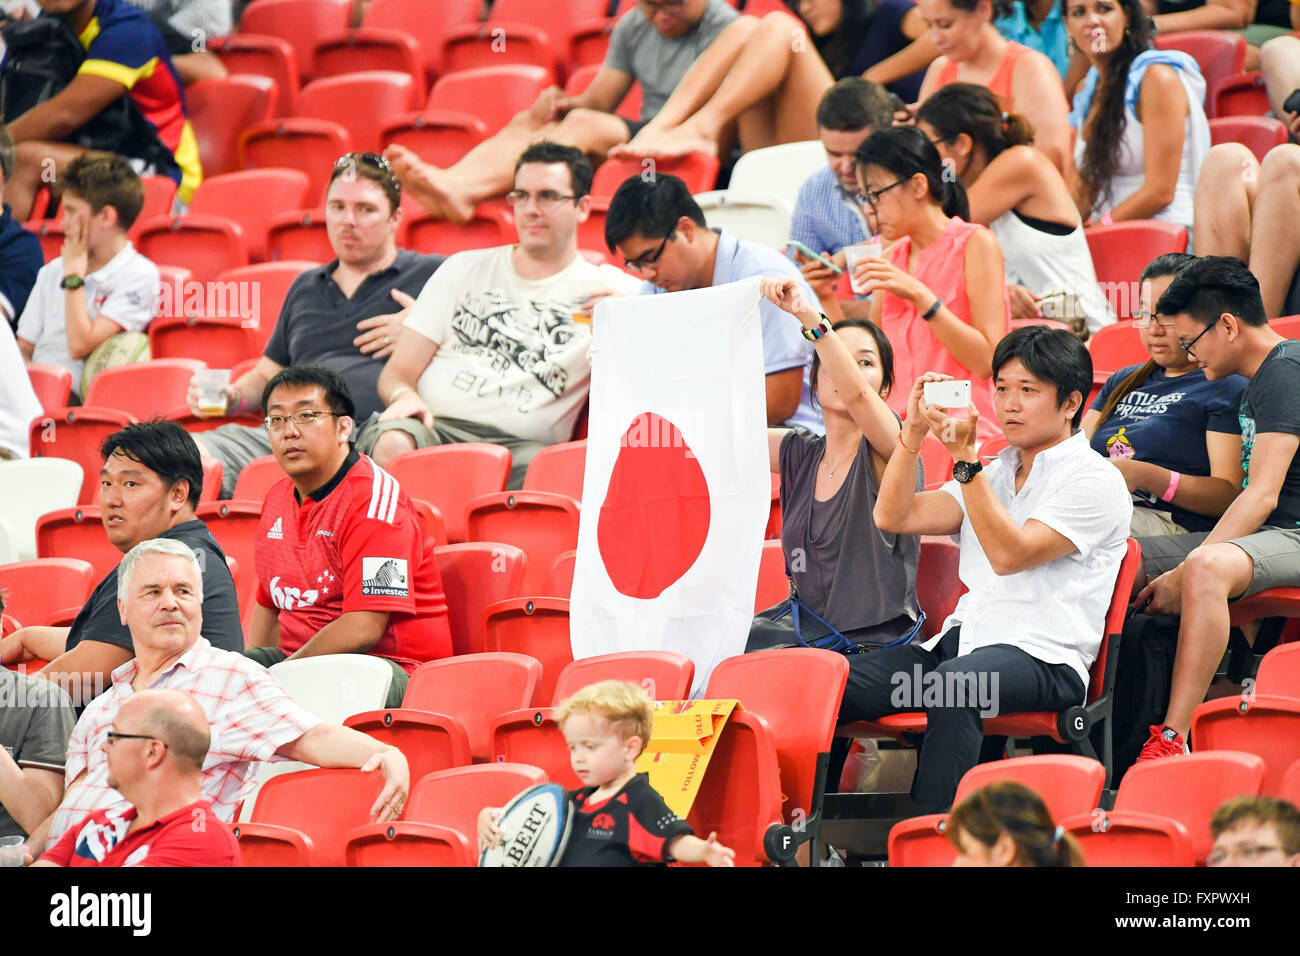 Japan fans (JPN), APRL 16, 2016 - Rugby : HSBC Sevens World Series, Singapore Sevens match Japan and Argentina at National Stadium in Singapore. (Photo by Haruhiko Otsuka/AFLO) Stock Photo